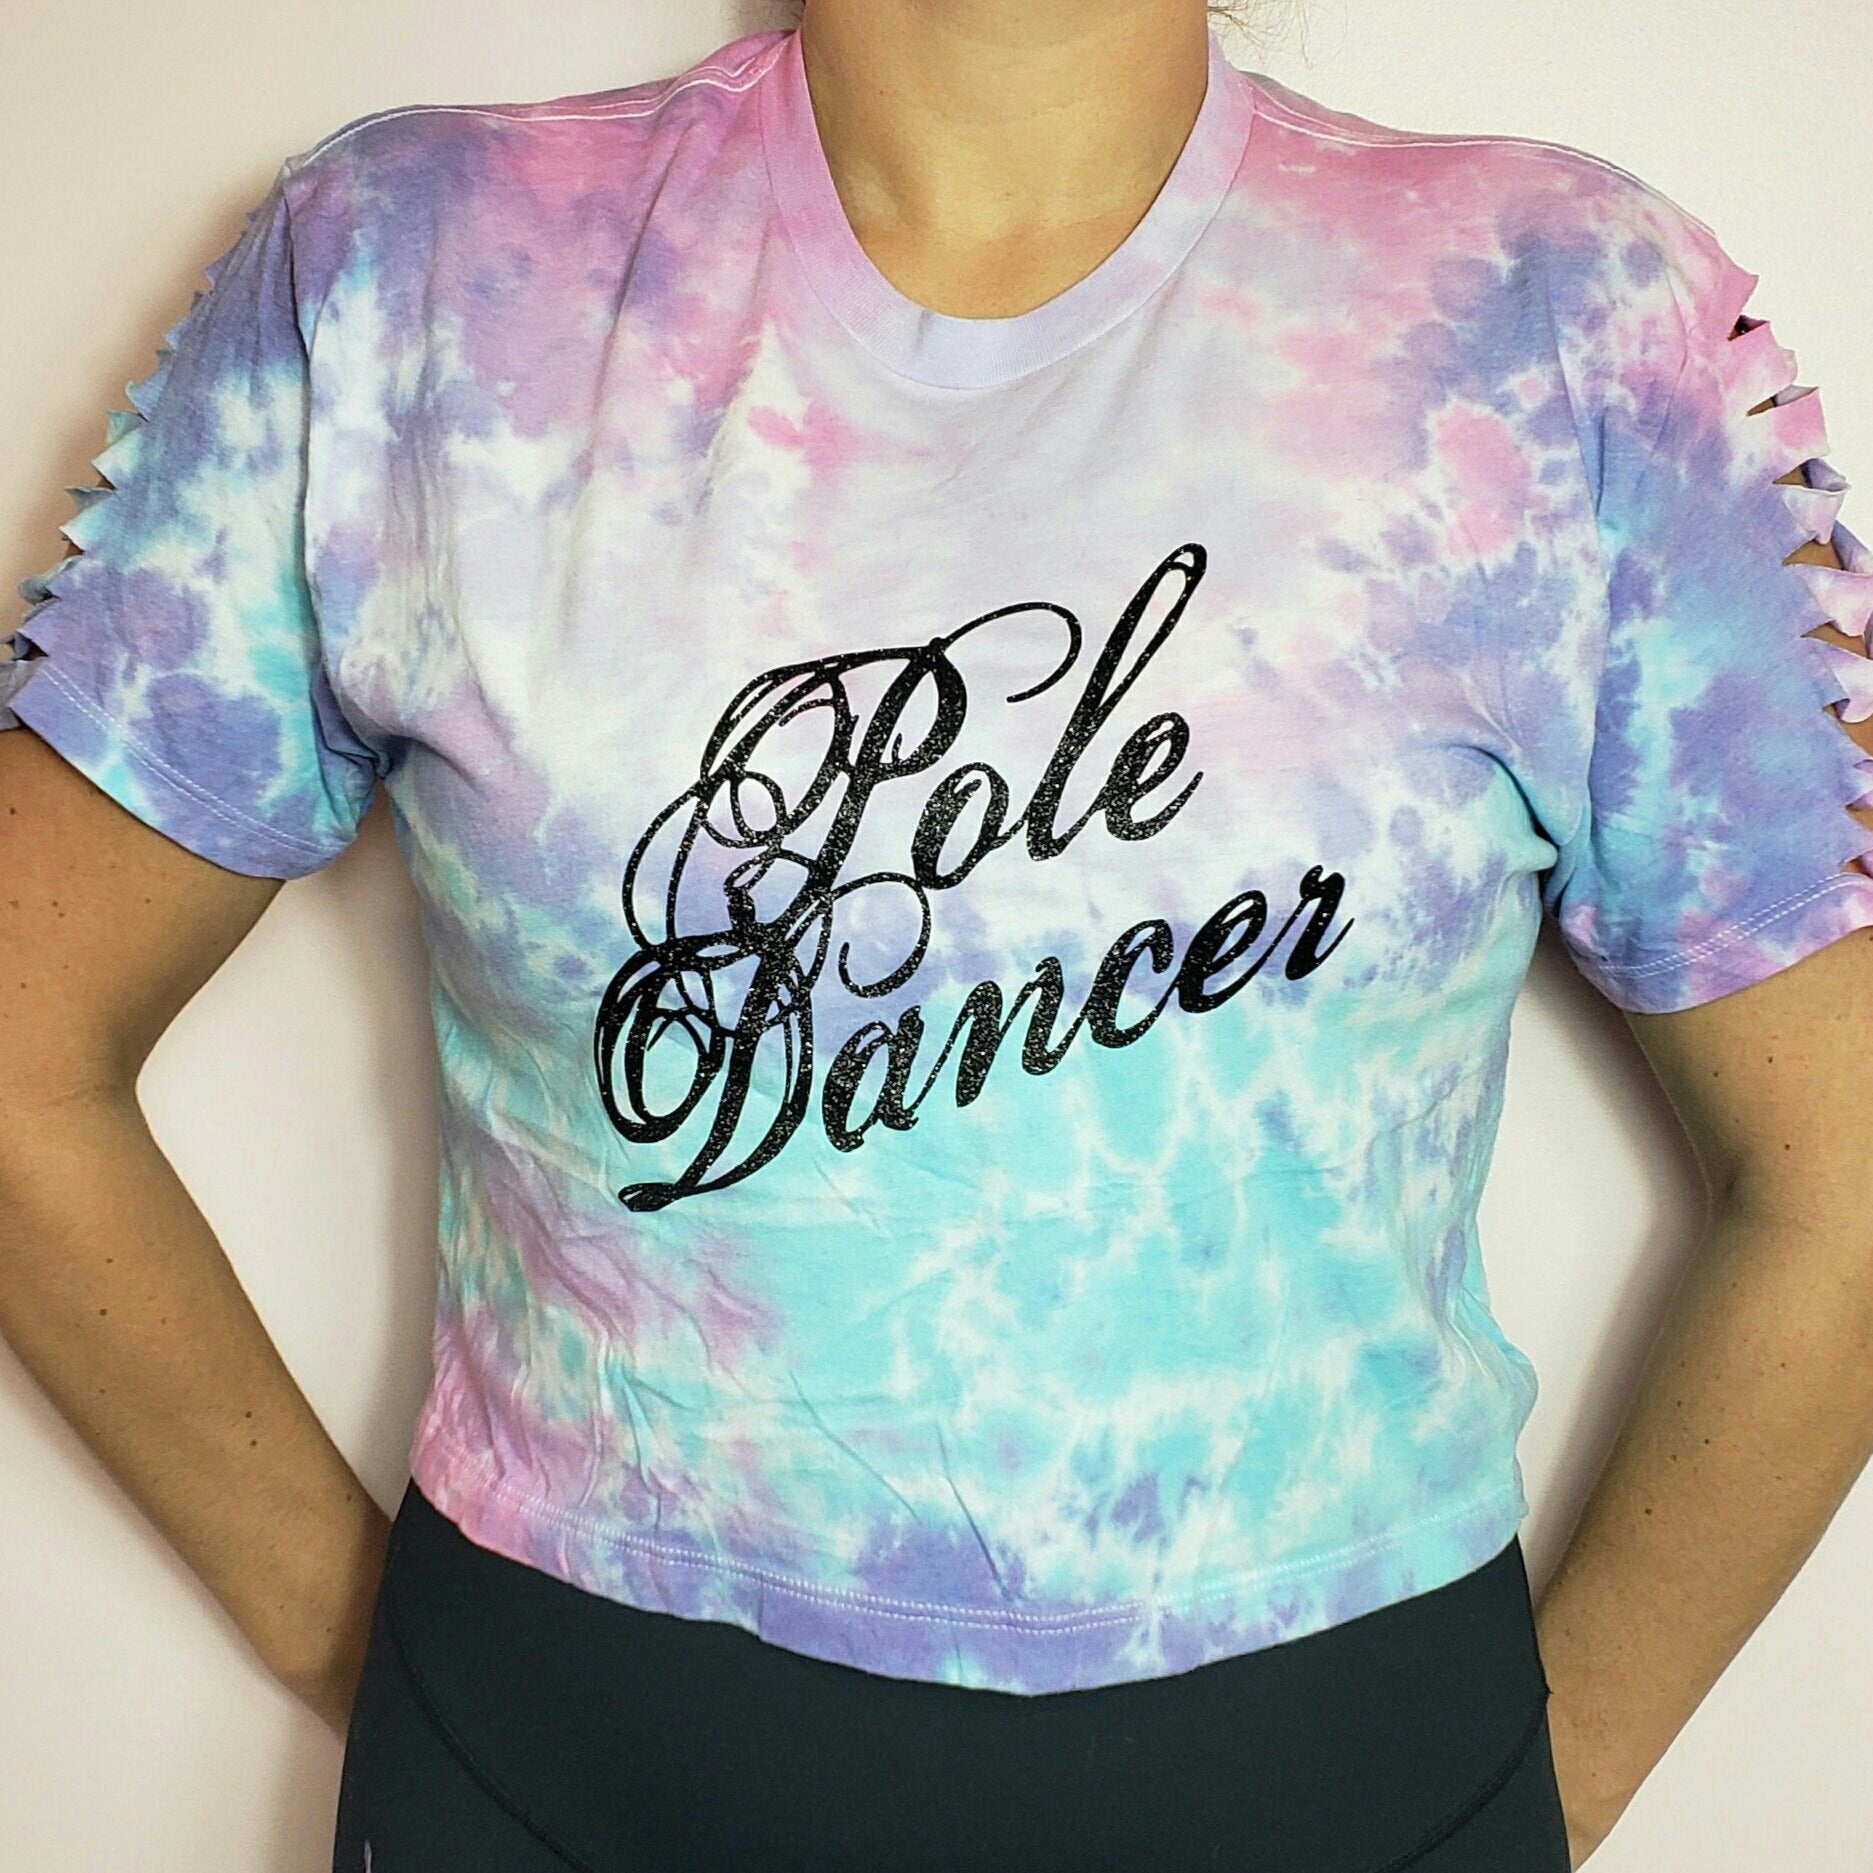 Tie-dye glitter pole dancer t-shirt with slashed sleeves